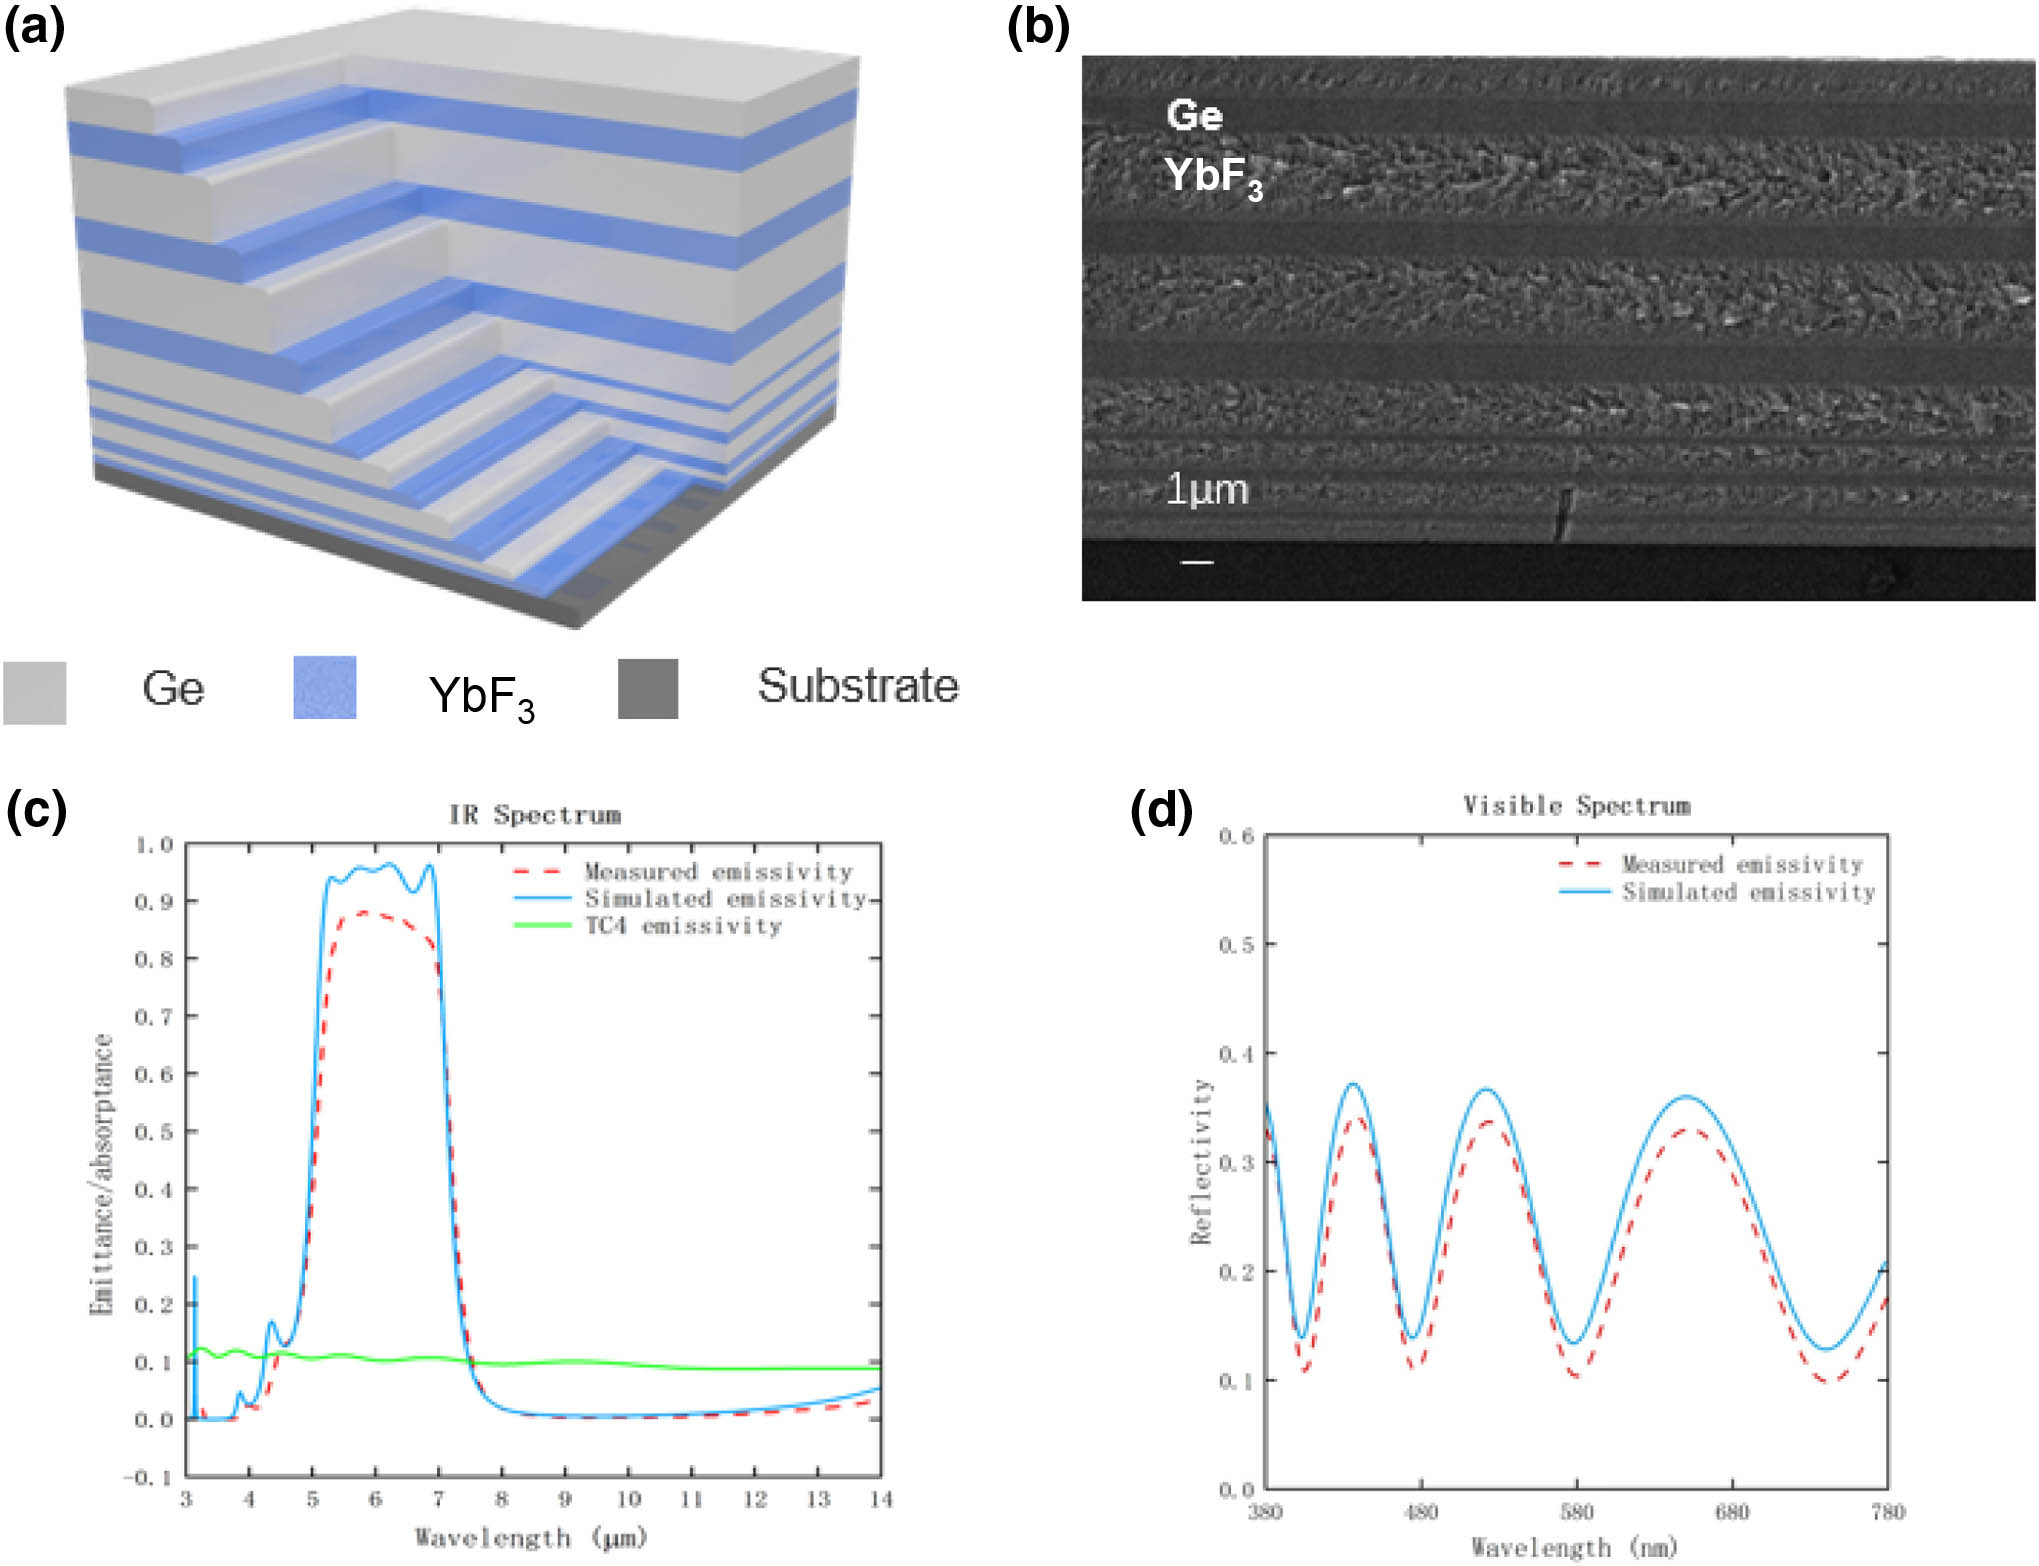 Simulation and measurements of multilayer film structure. (a) Schematic of the film cladding structure. (b) Scanning electron microscopy image of the prepared Ge/YbF3 multilayer film (14 layers) at a scale of 1 μm. (c) Simulated emission/absorption spectra of selected emitters (blue solid line), emission/absorption spectra of selected emitters measured by Fourier-transform IR spectroscopy (red dashed line), and comparison with measured titanium alloy TC4 emission/absorption spectra. (d) Simulated reflectance in the visible band of the wavelength-selective emitter (blue solid line) and reflectance measured by the spectrophotometer (red dashed line).